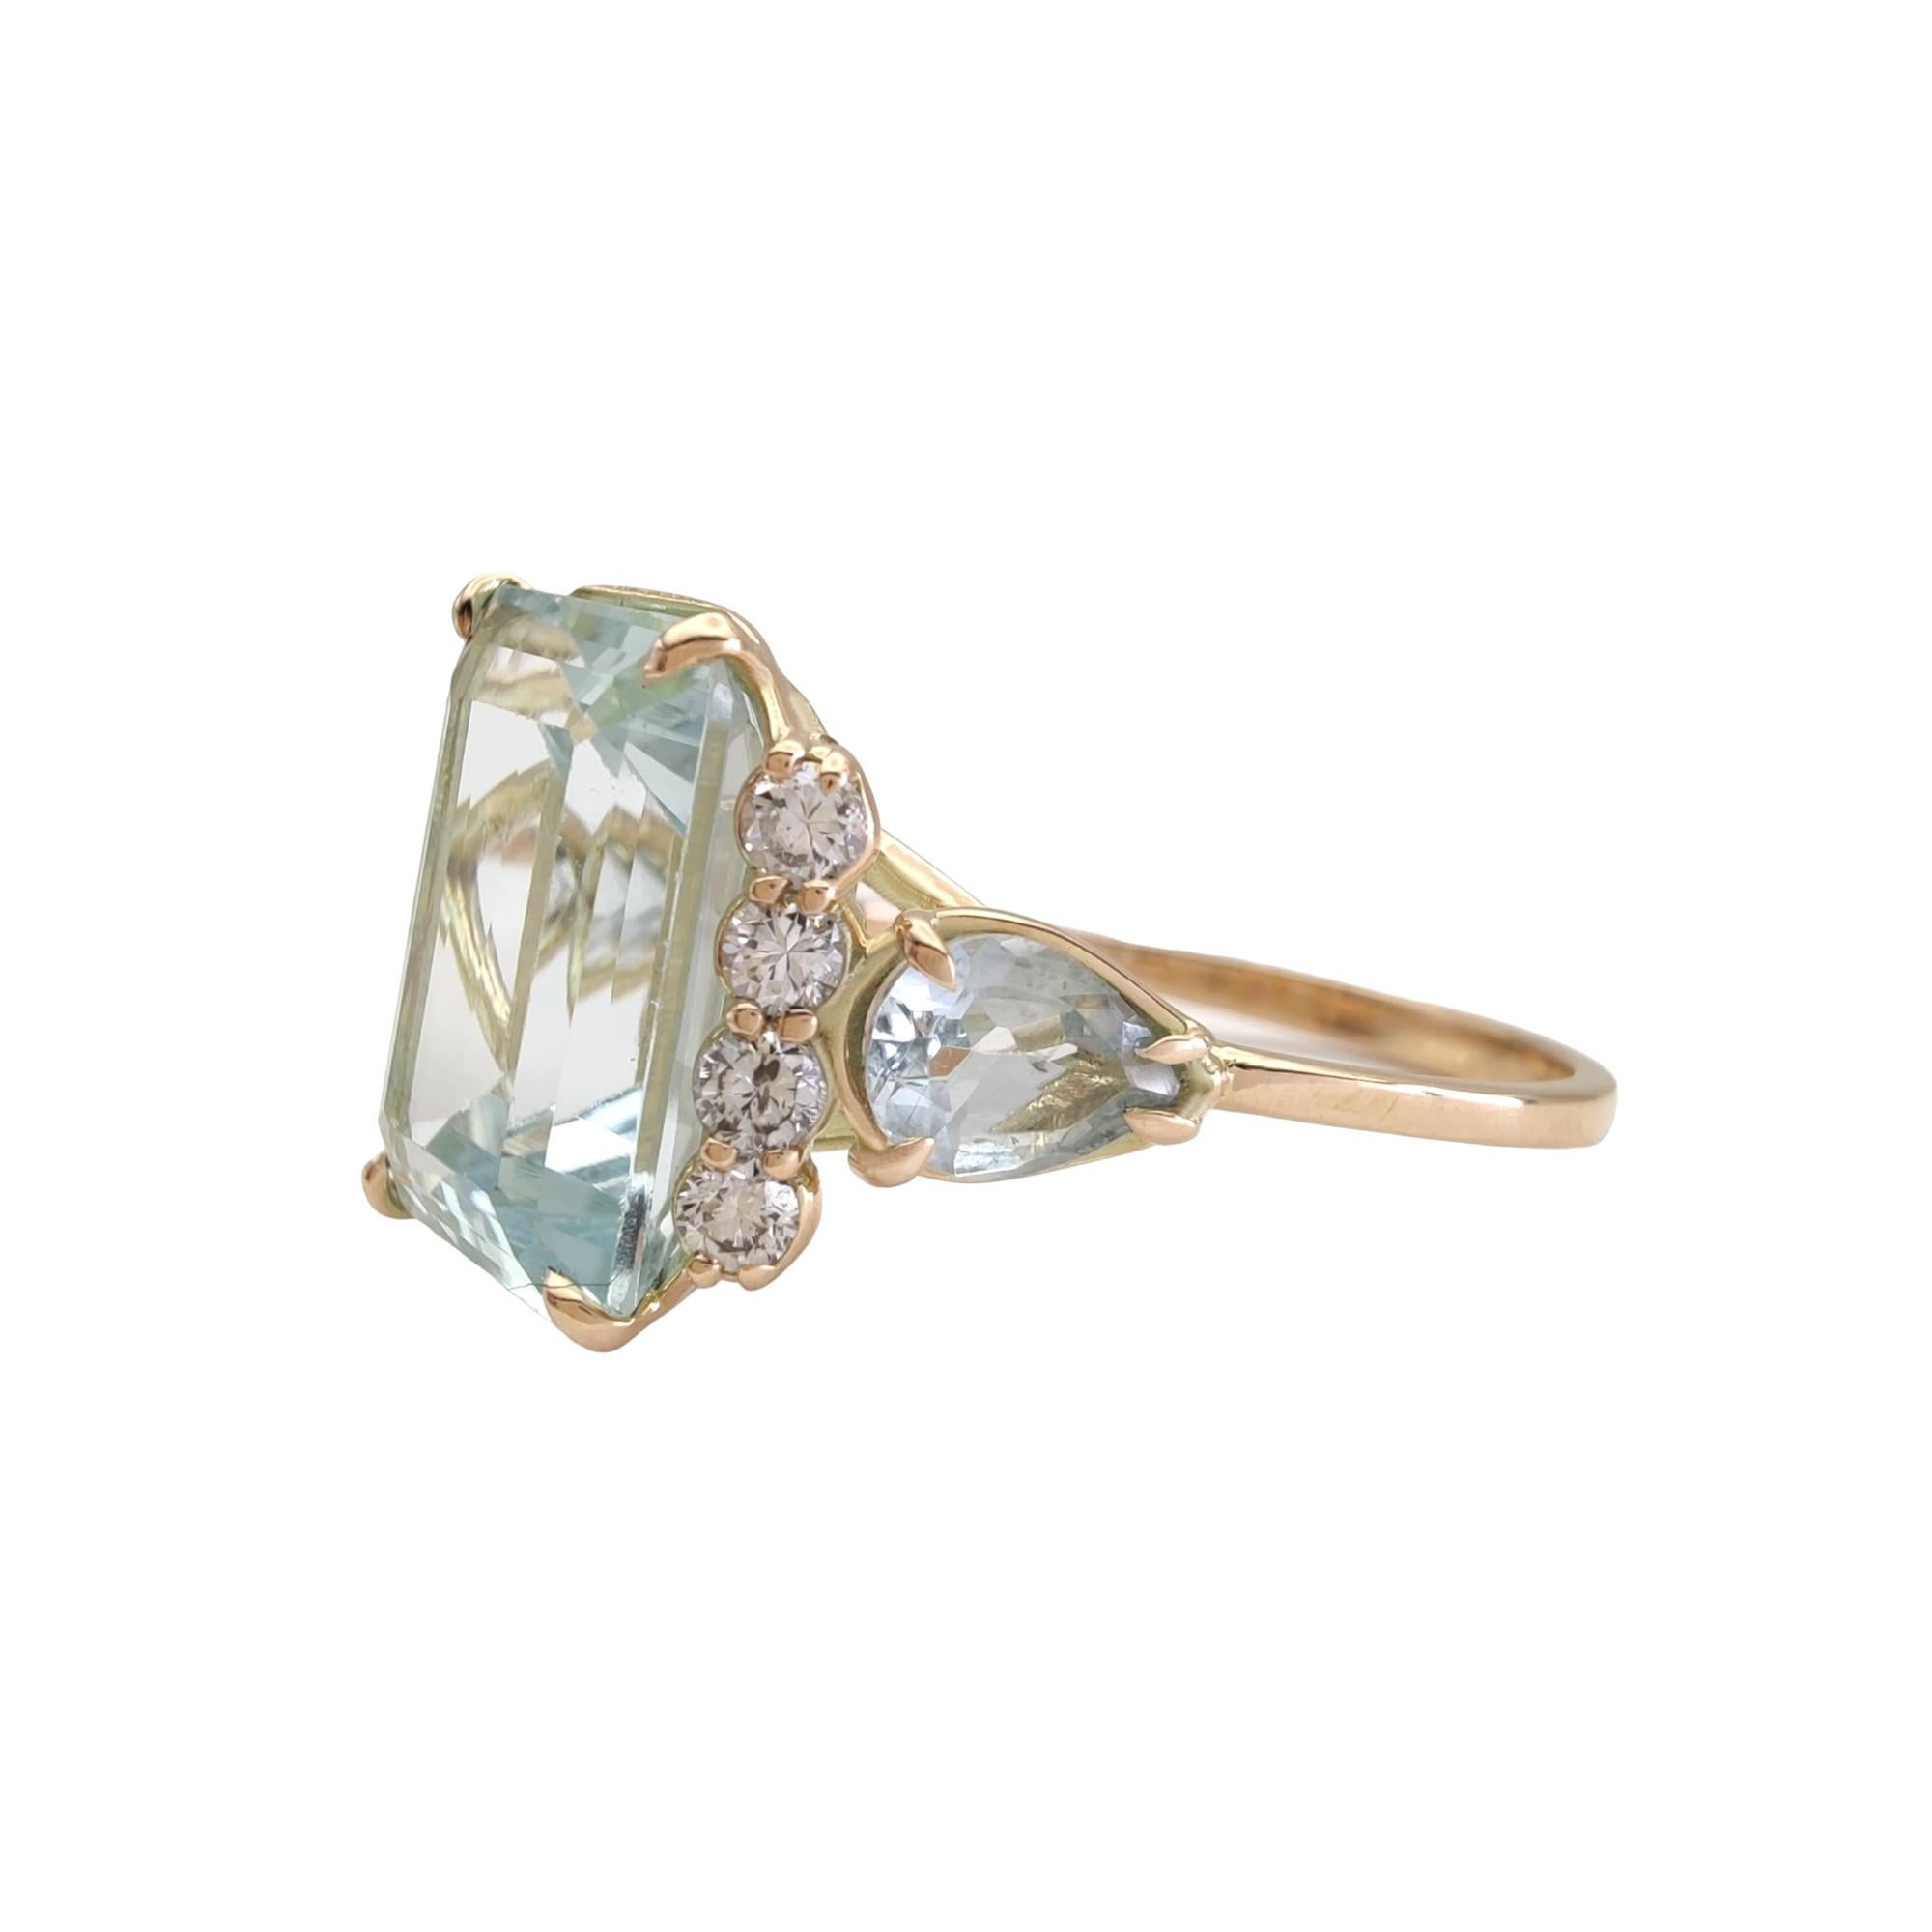 Women's 14K Gold Ring Aquamarine and Diamonds Perfect for Proposals Engagements 5